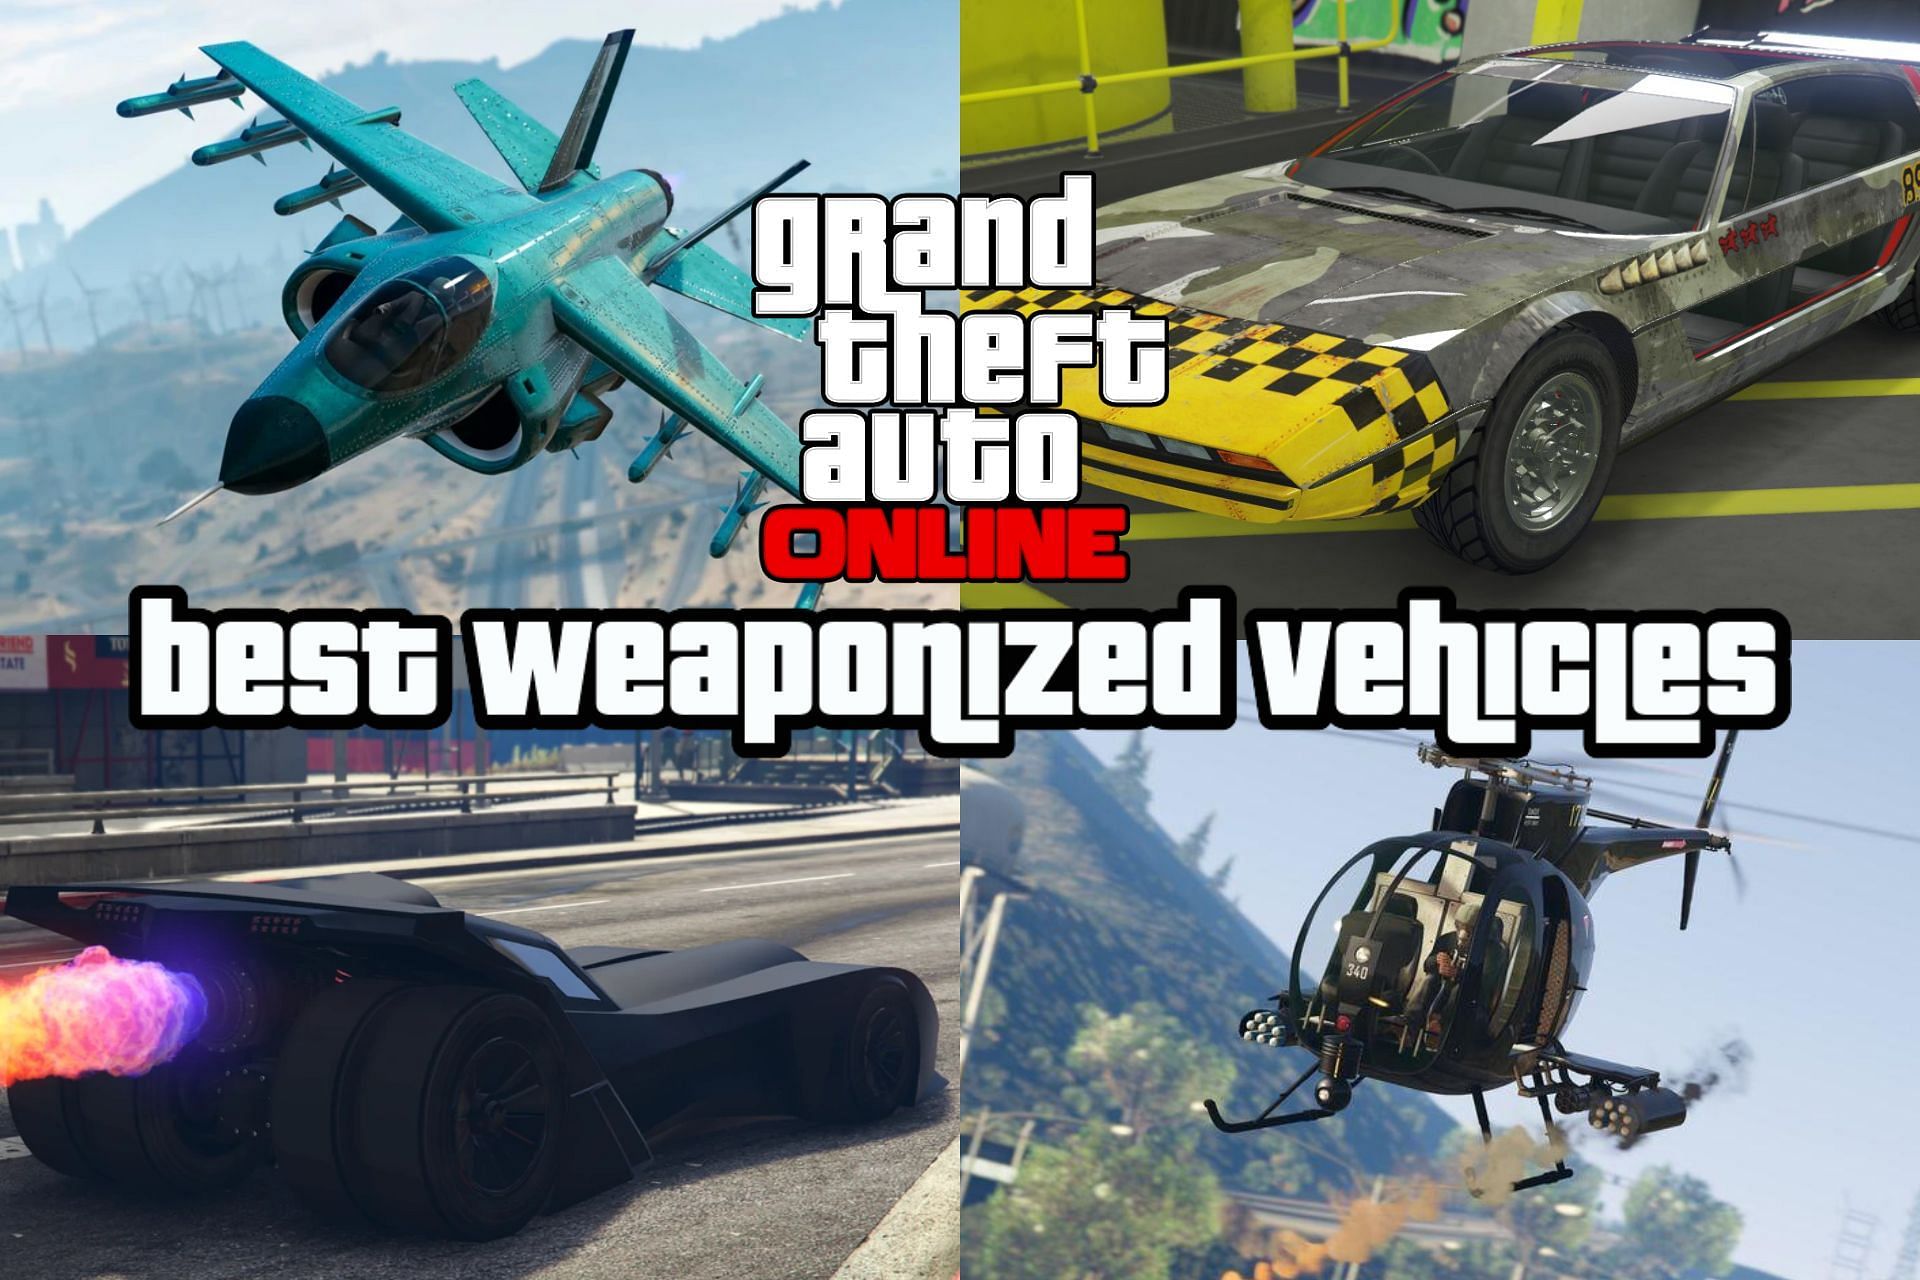 GTA Online players should look for these five best weaponized vehicles (Images via Rockstar Games)